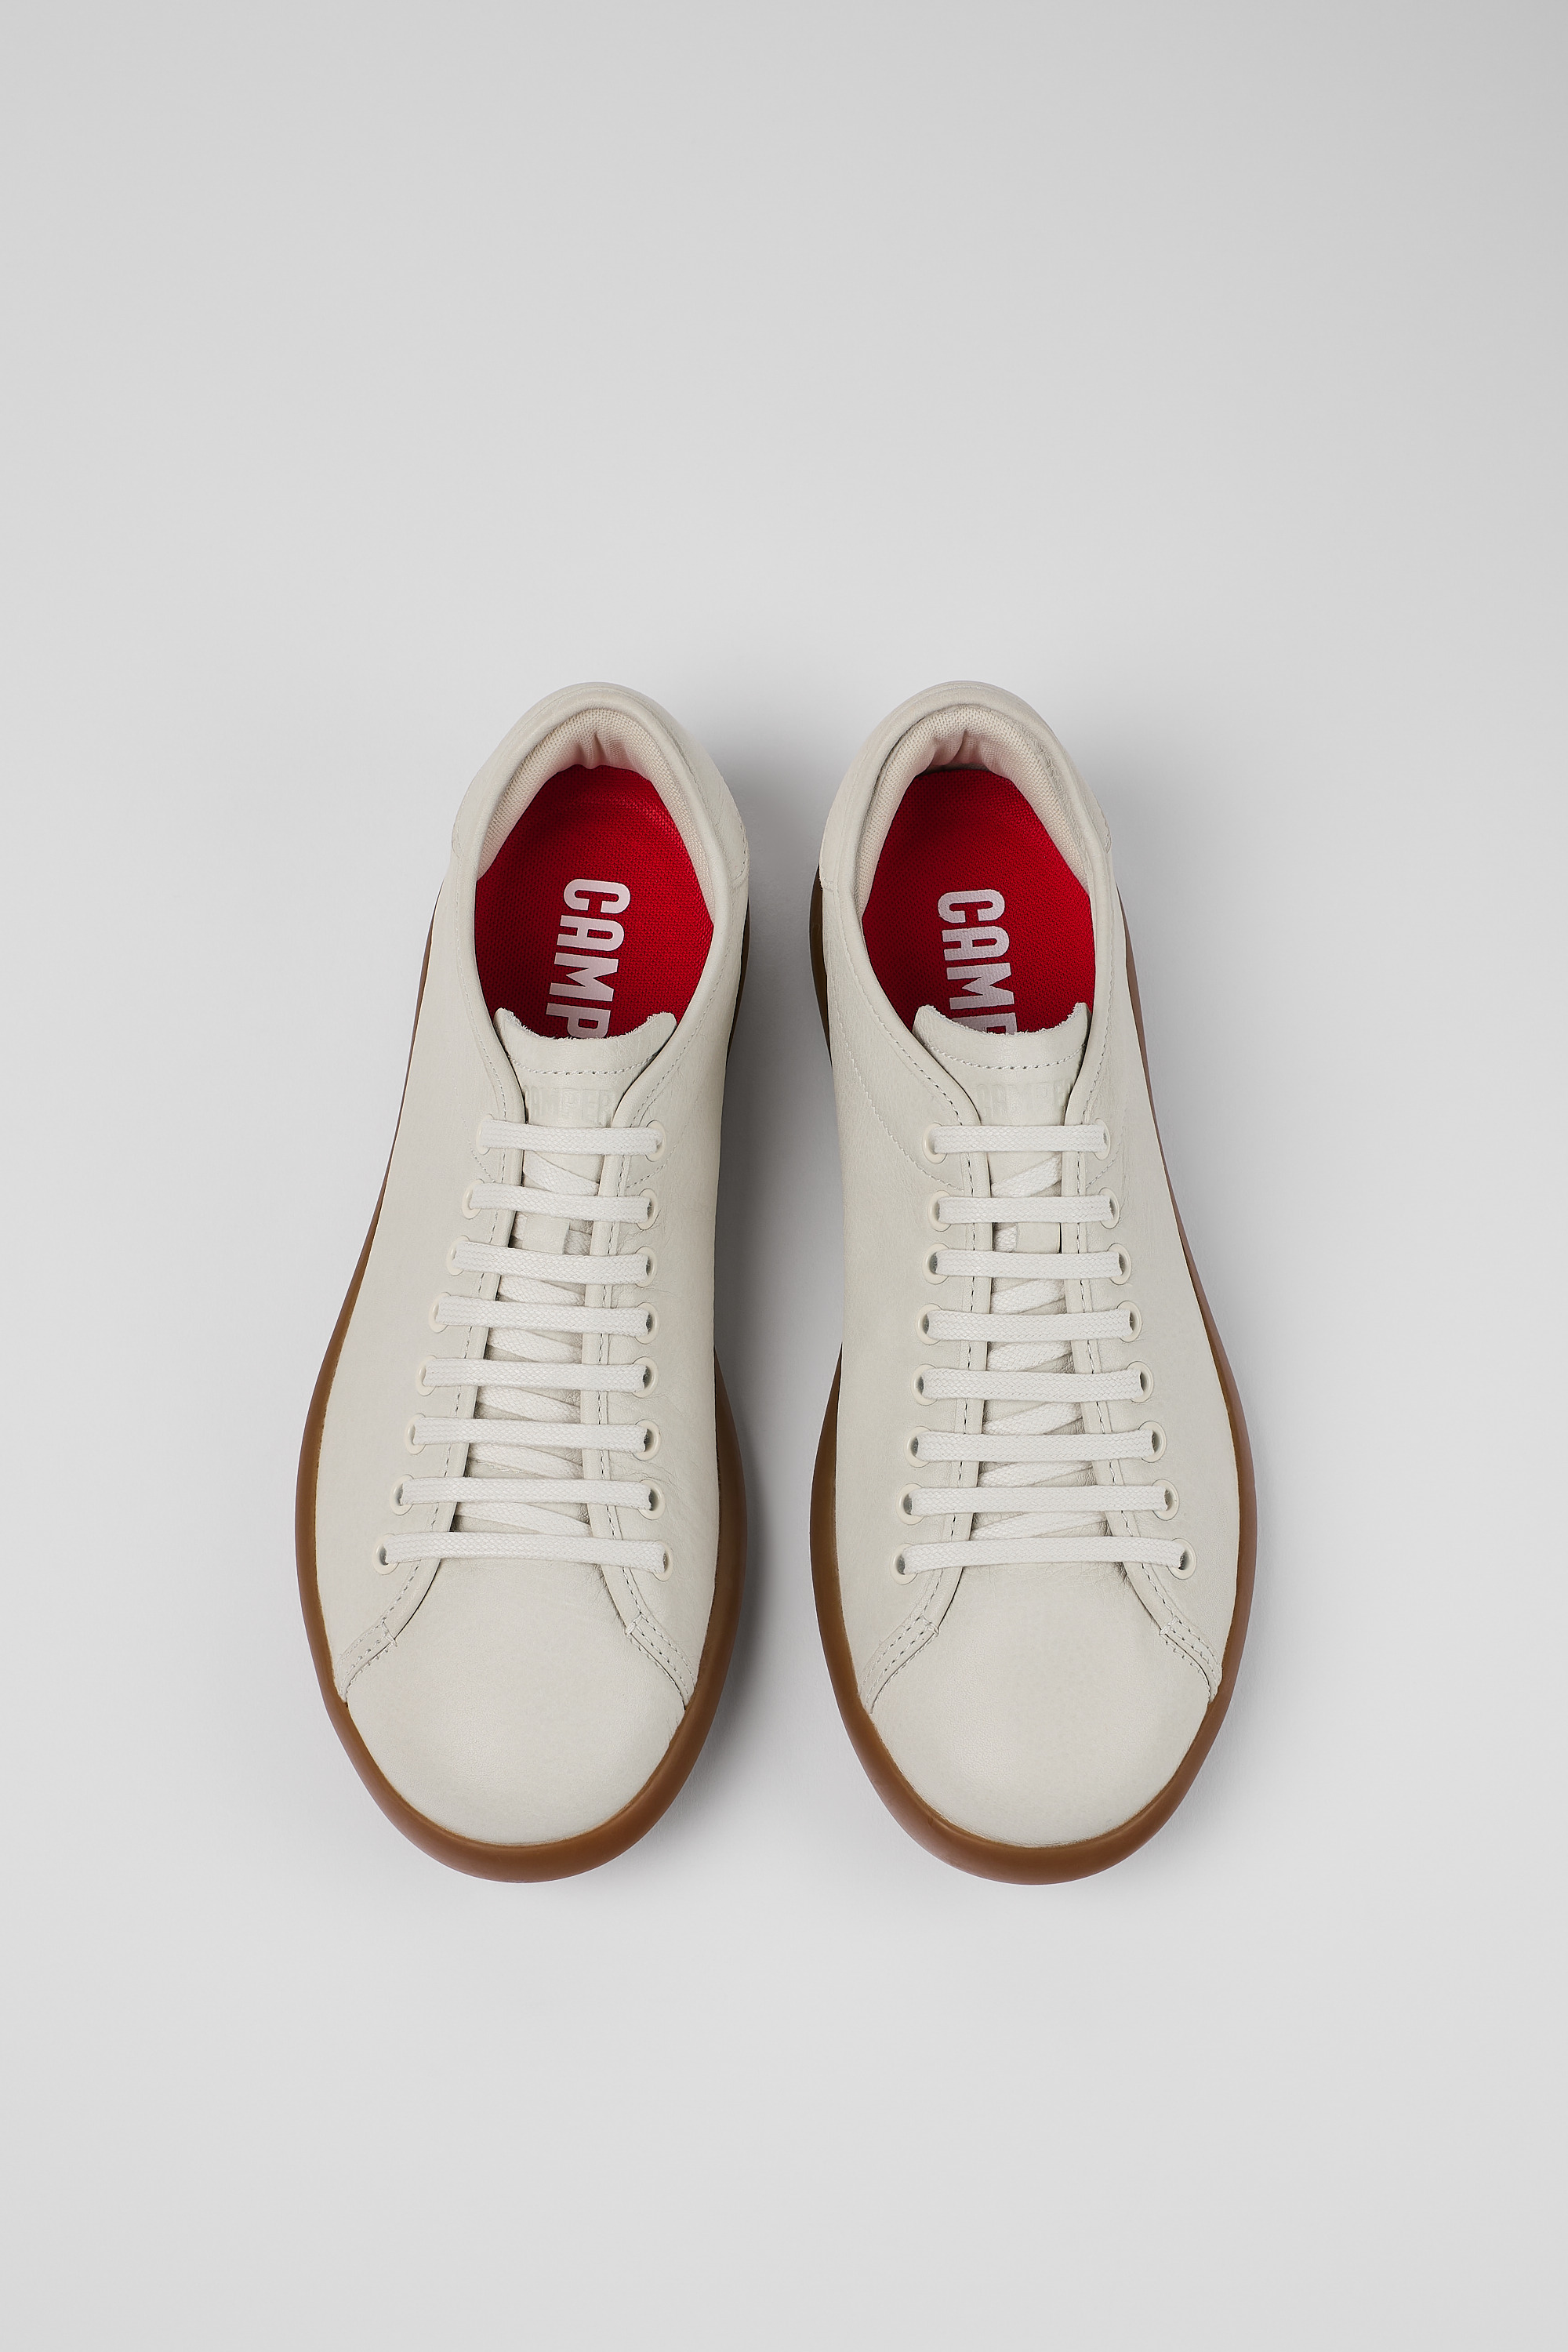 Pelotas White Sneakers for Men - Fall/Winter collection - Camper USA